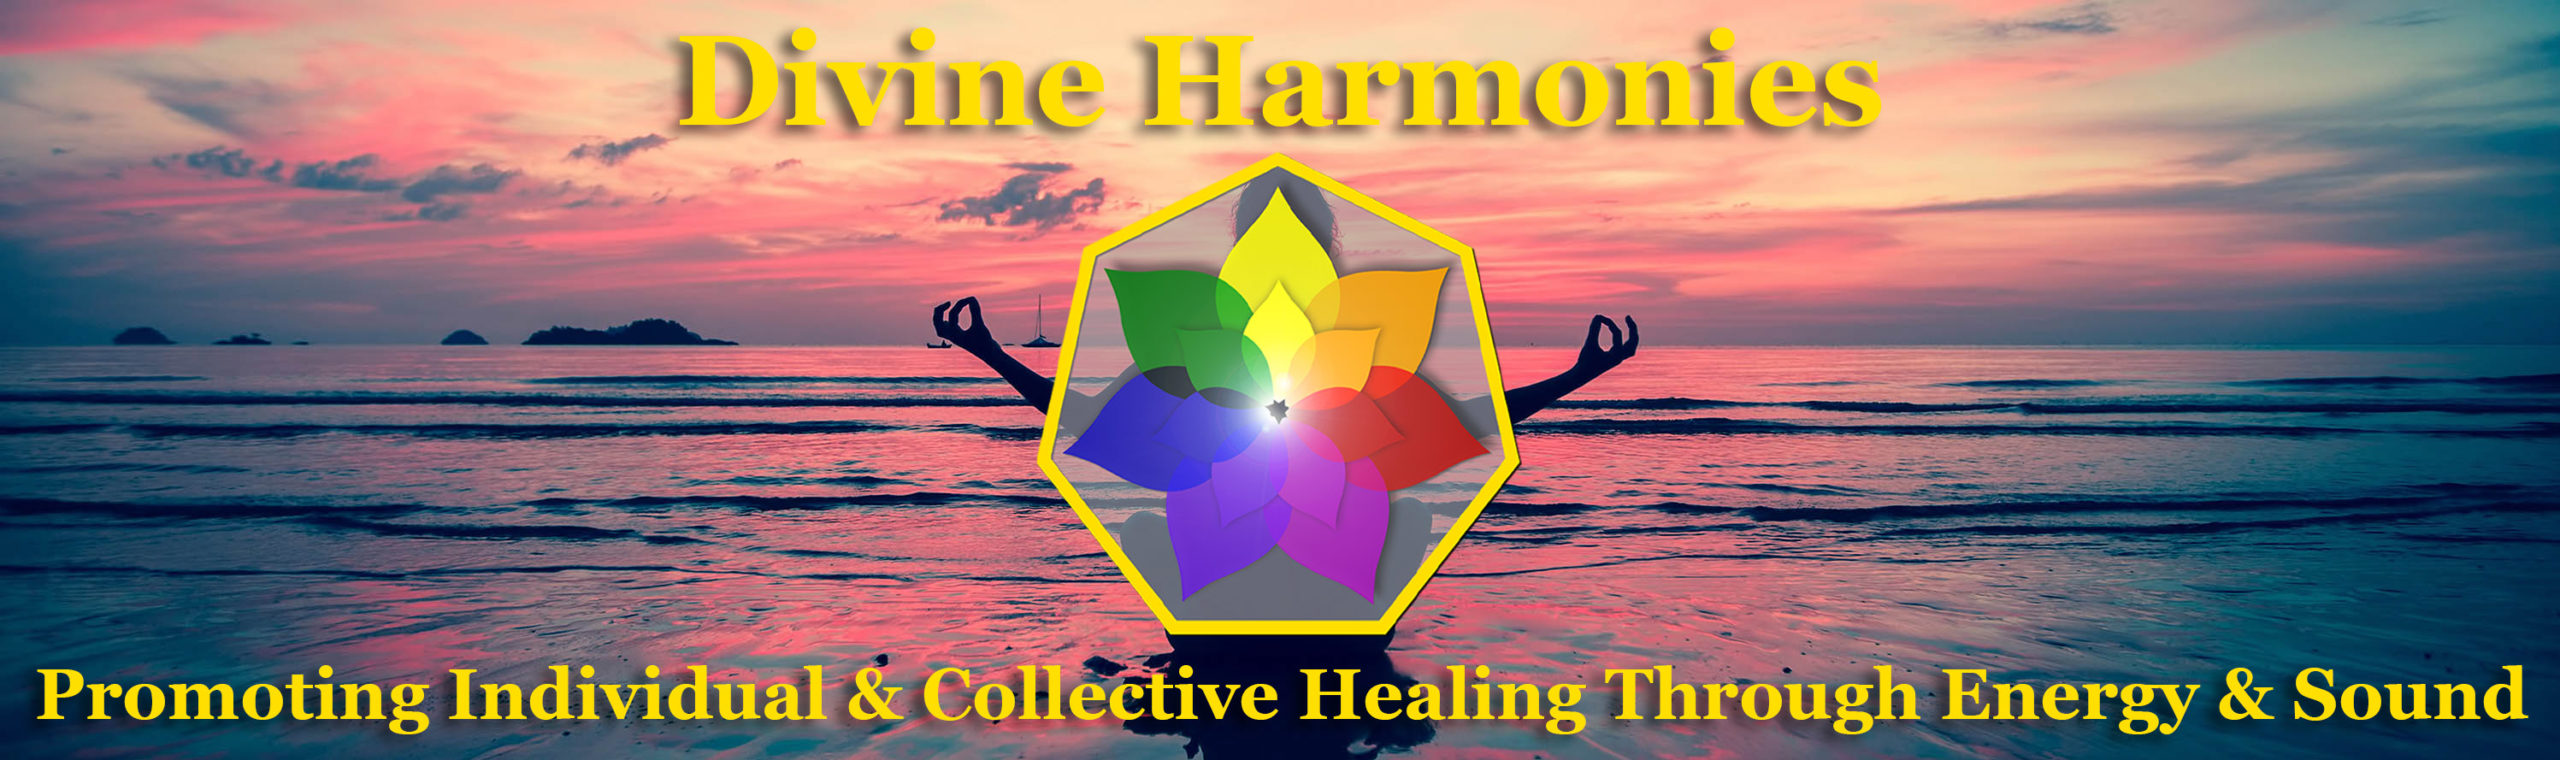 Divine Harmonies | Promoting personal and spiritual growth through ...